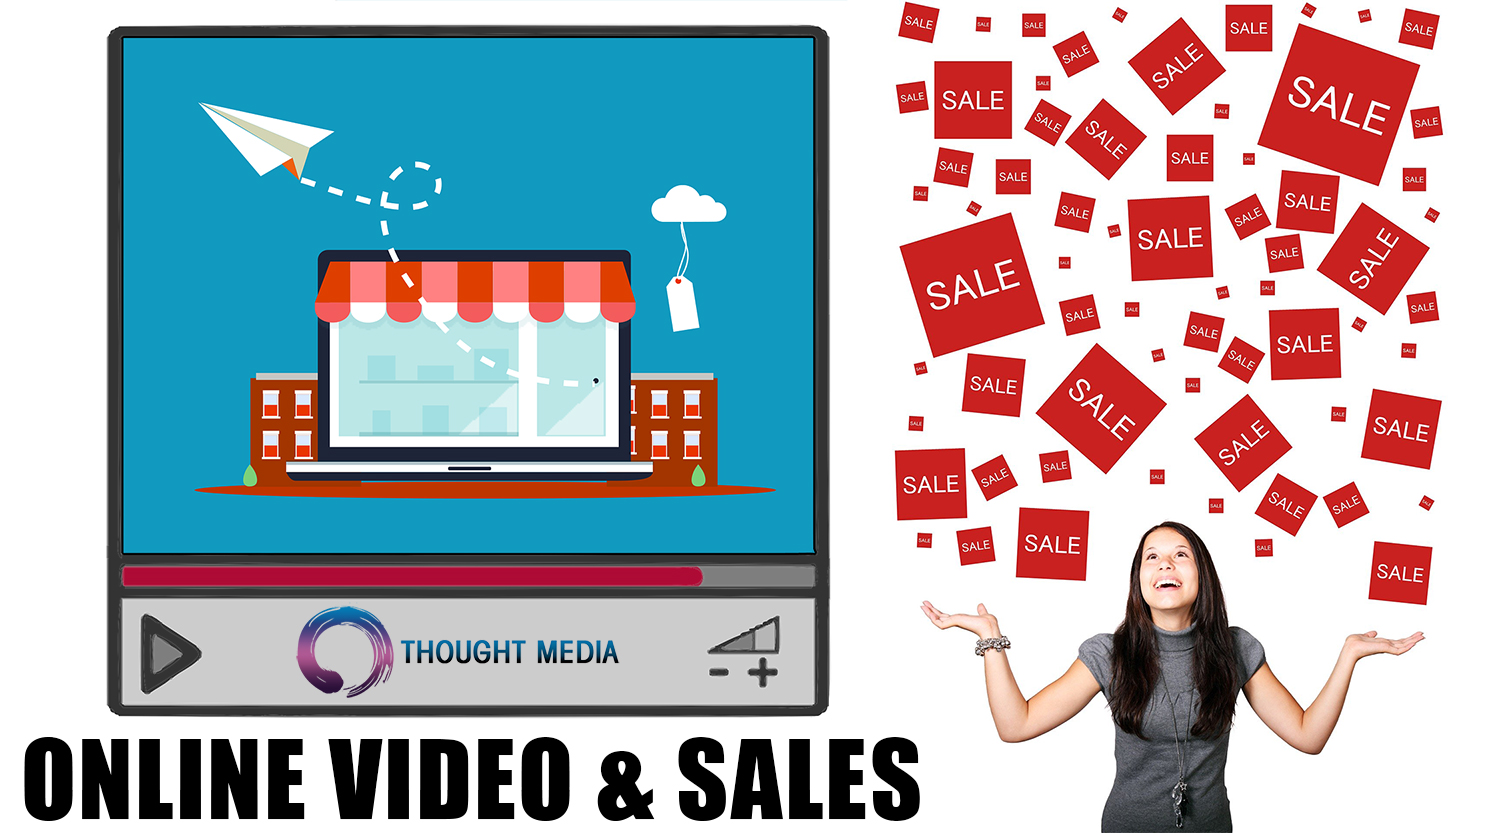 Why Use Explainer Videos? Can Online Video Boost Your Business Sales?